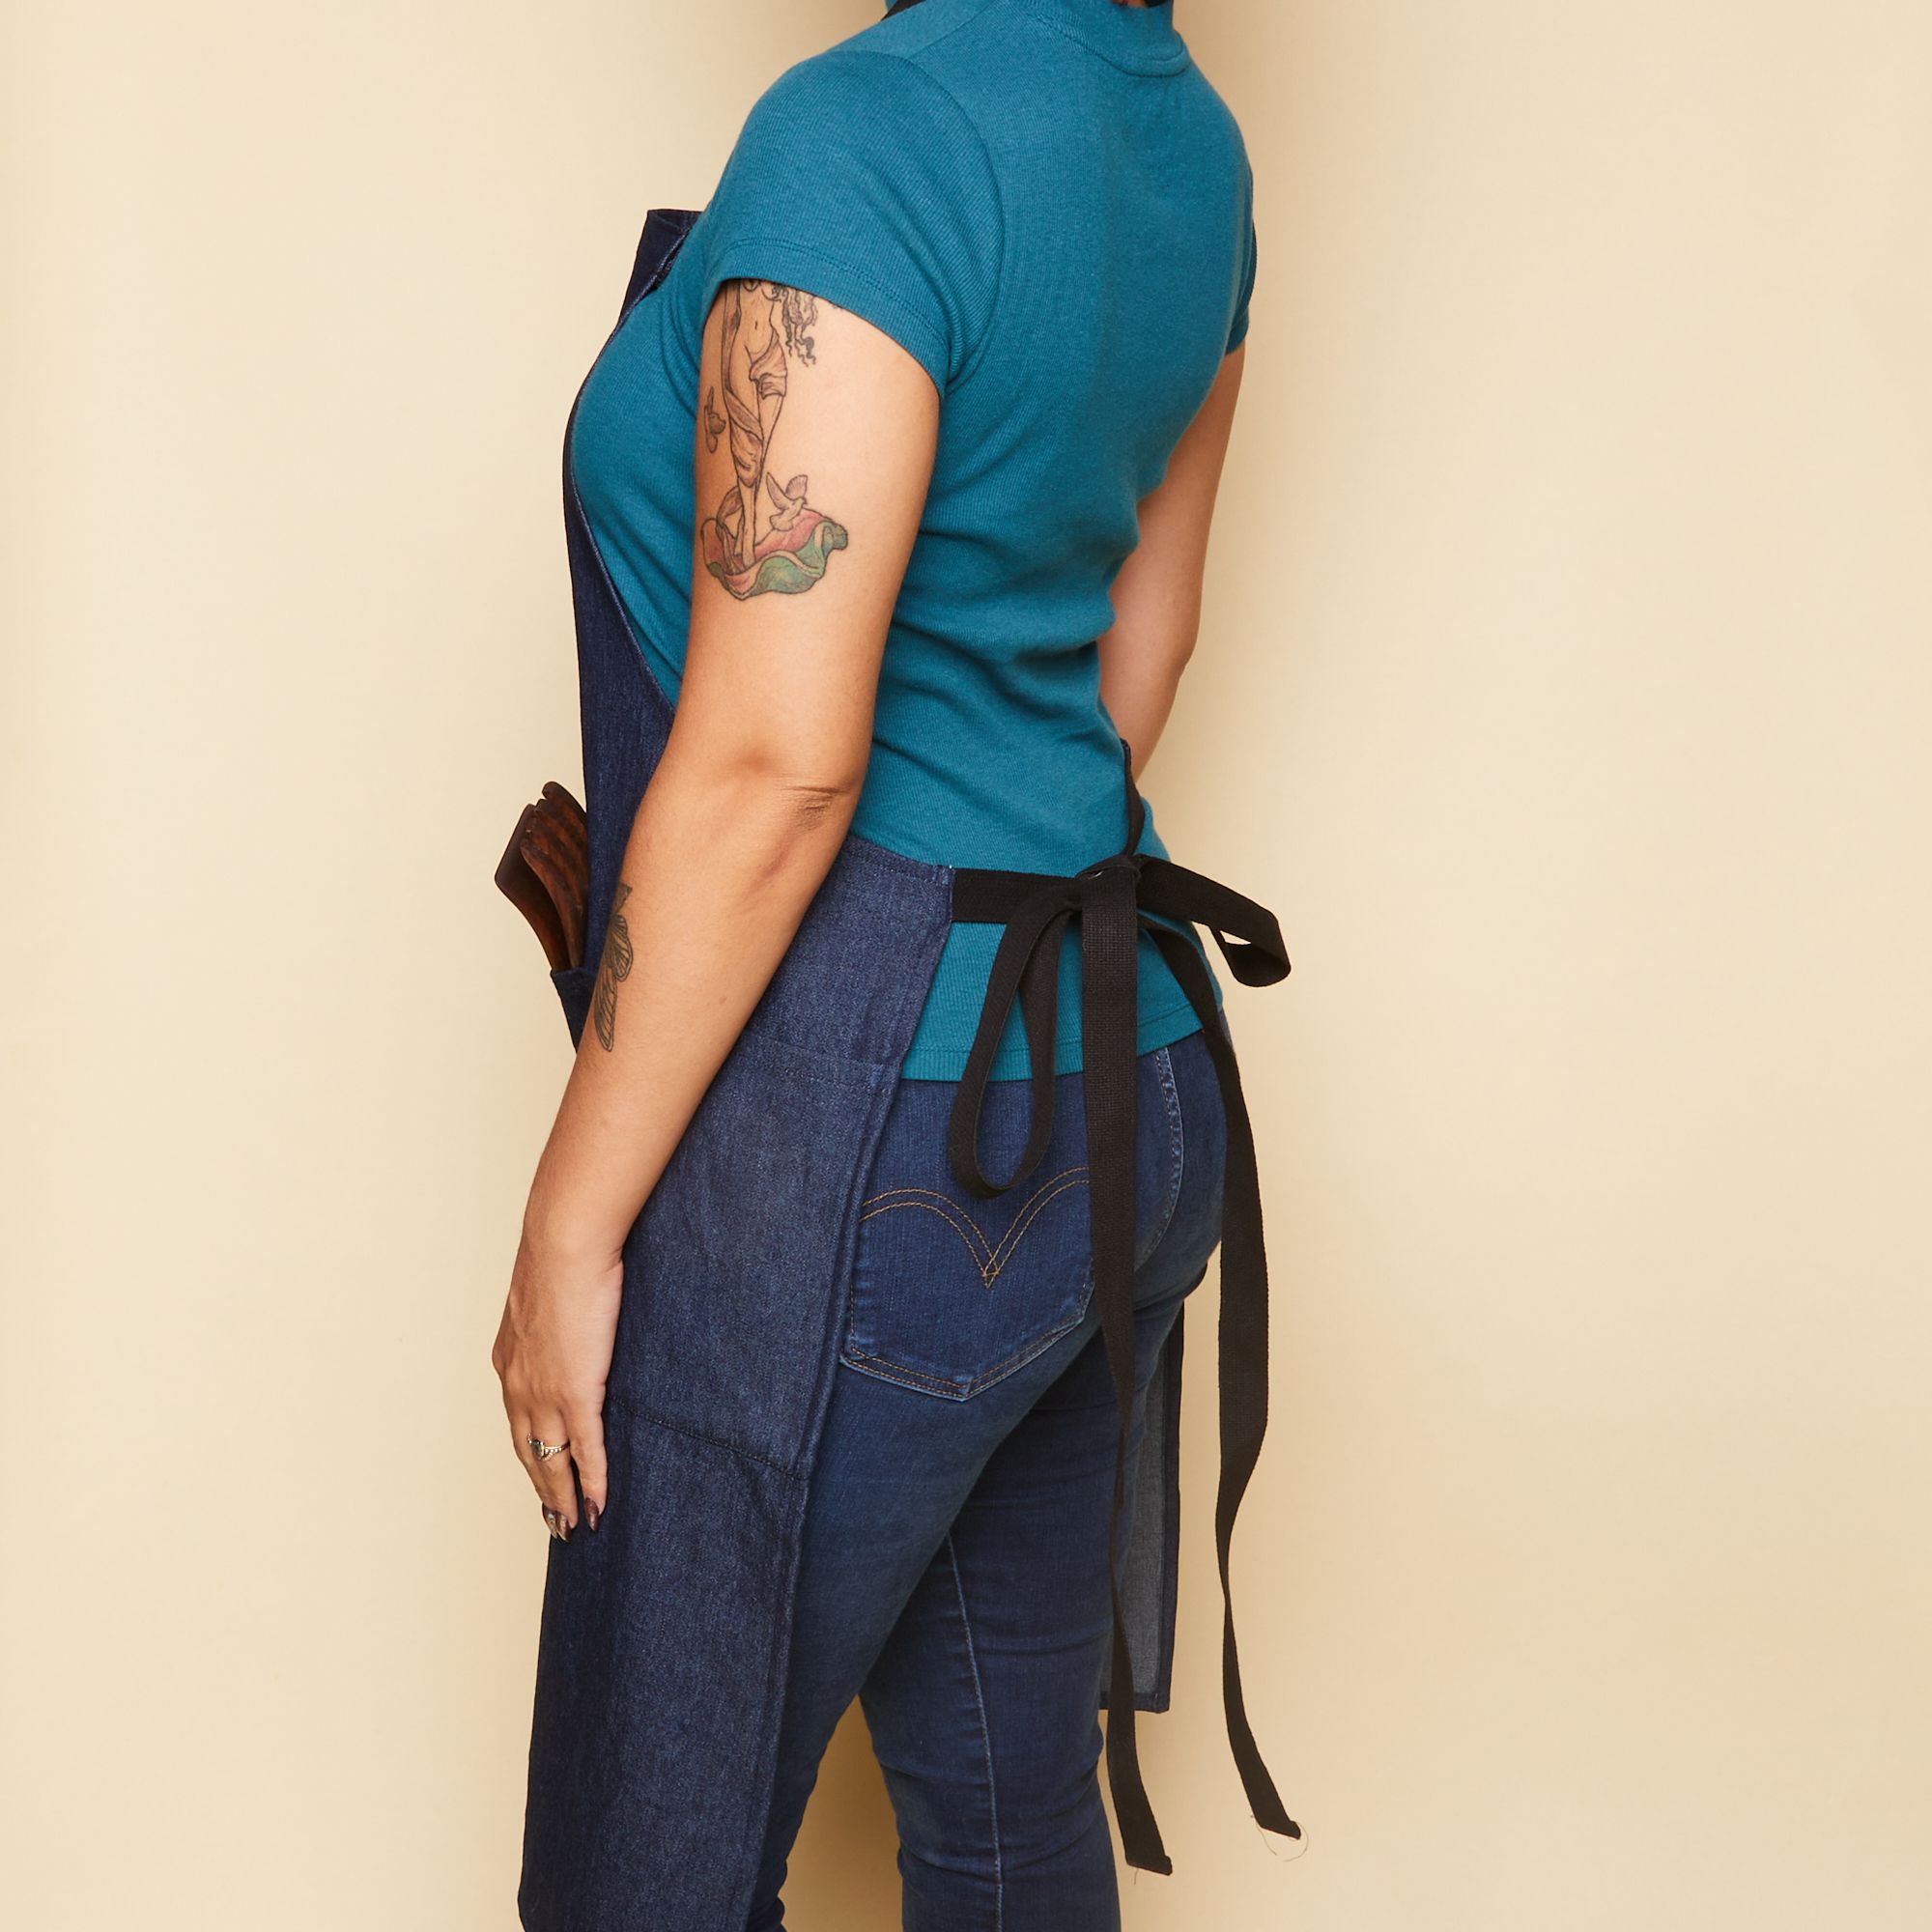 Model smiling wearing a blue shirt and jeans with a long denim blue apron over it that is tied in the back